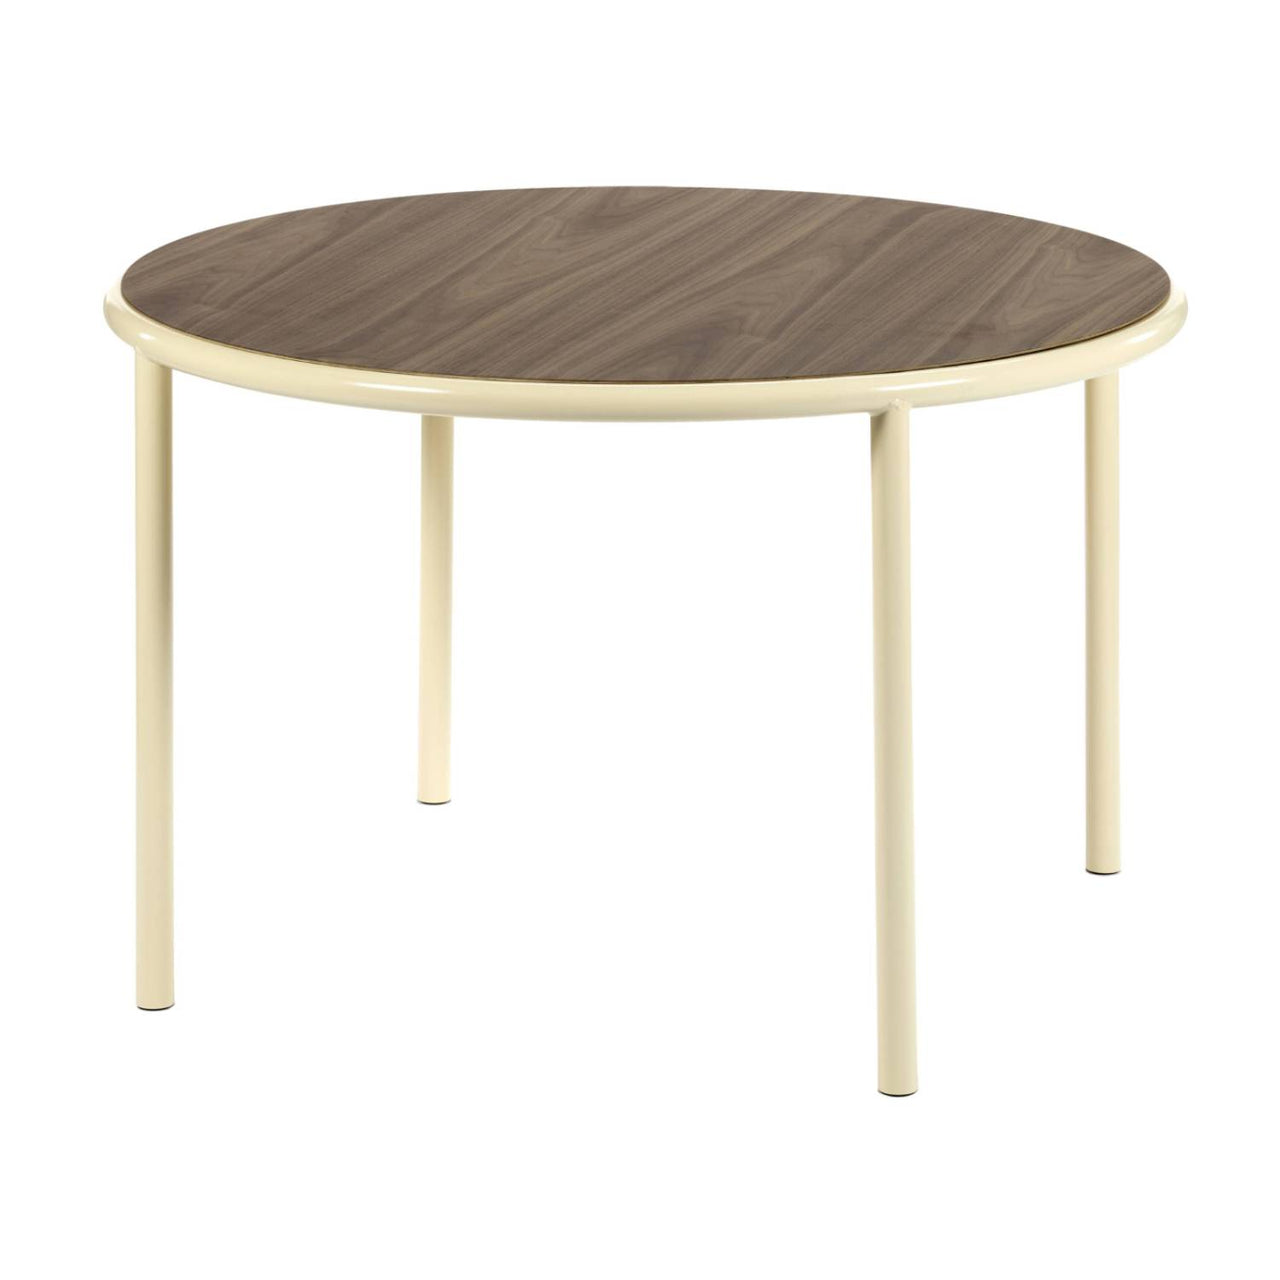 Wooden Table Round: Large - 59.1